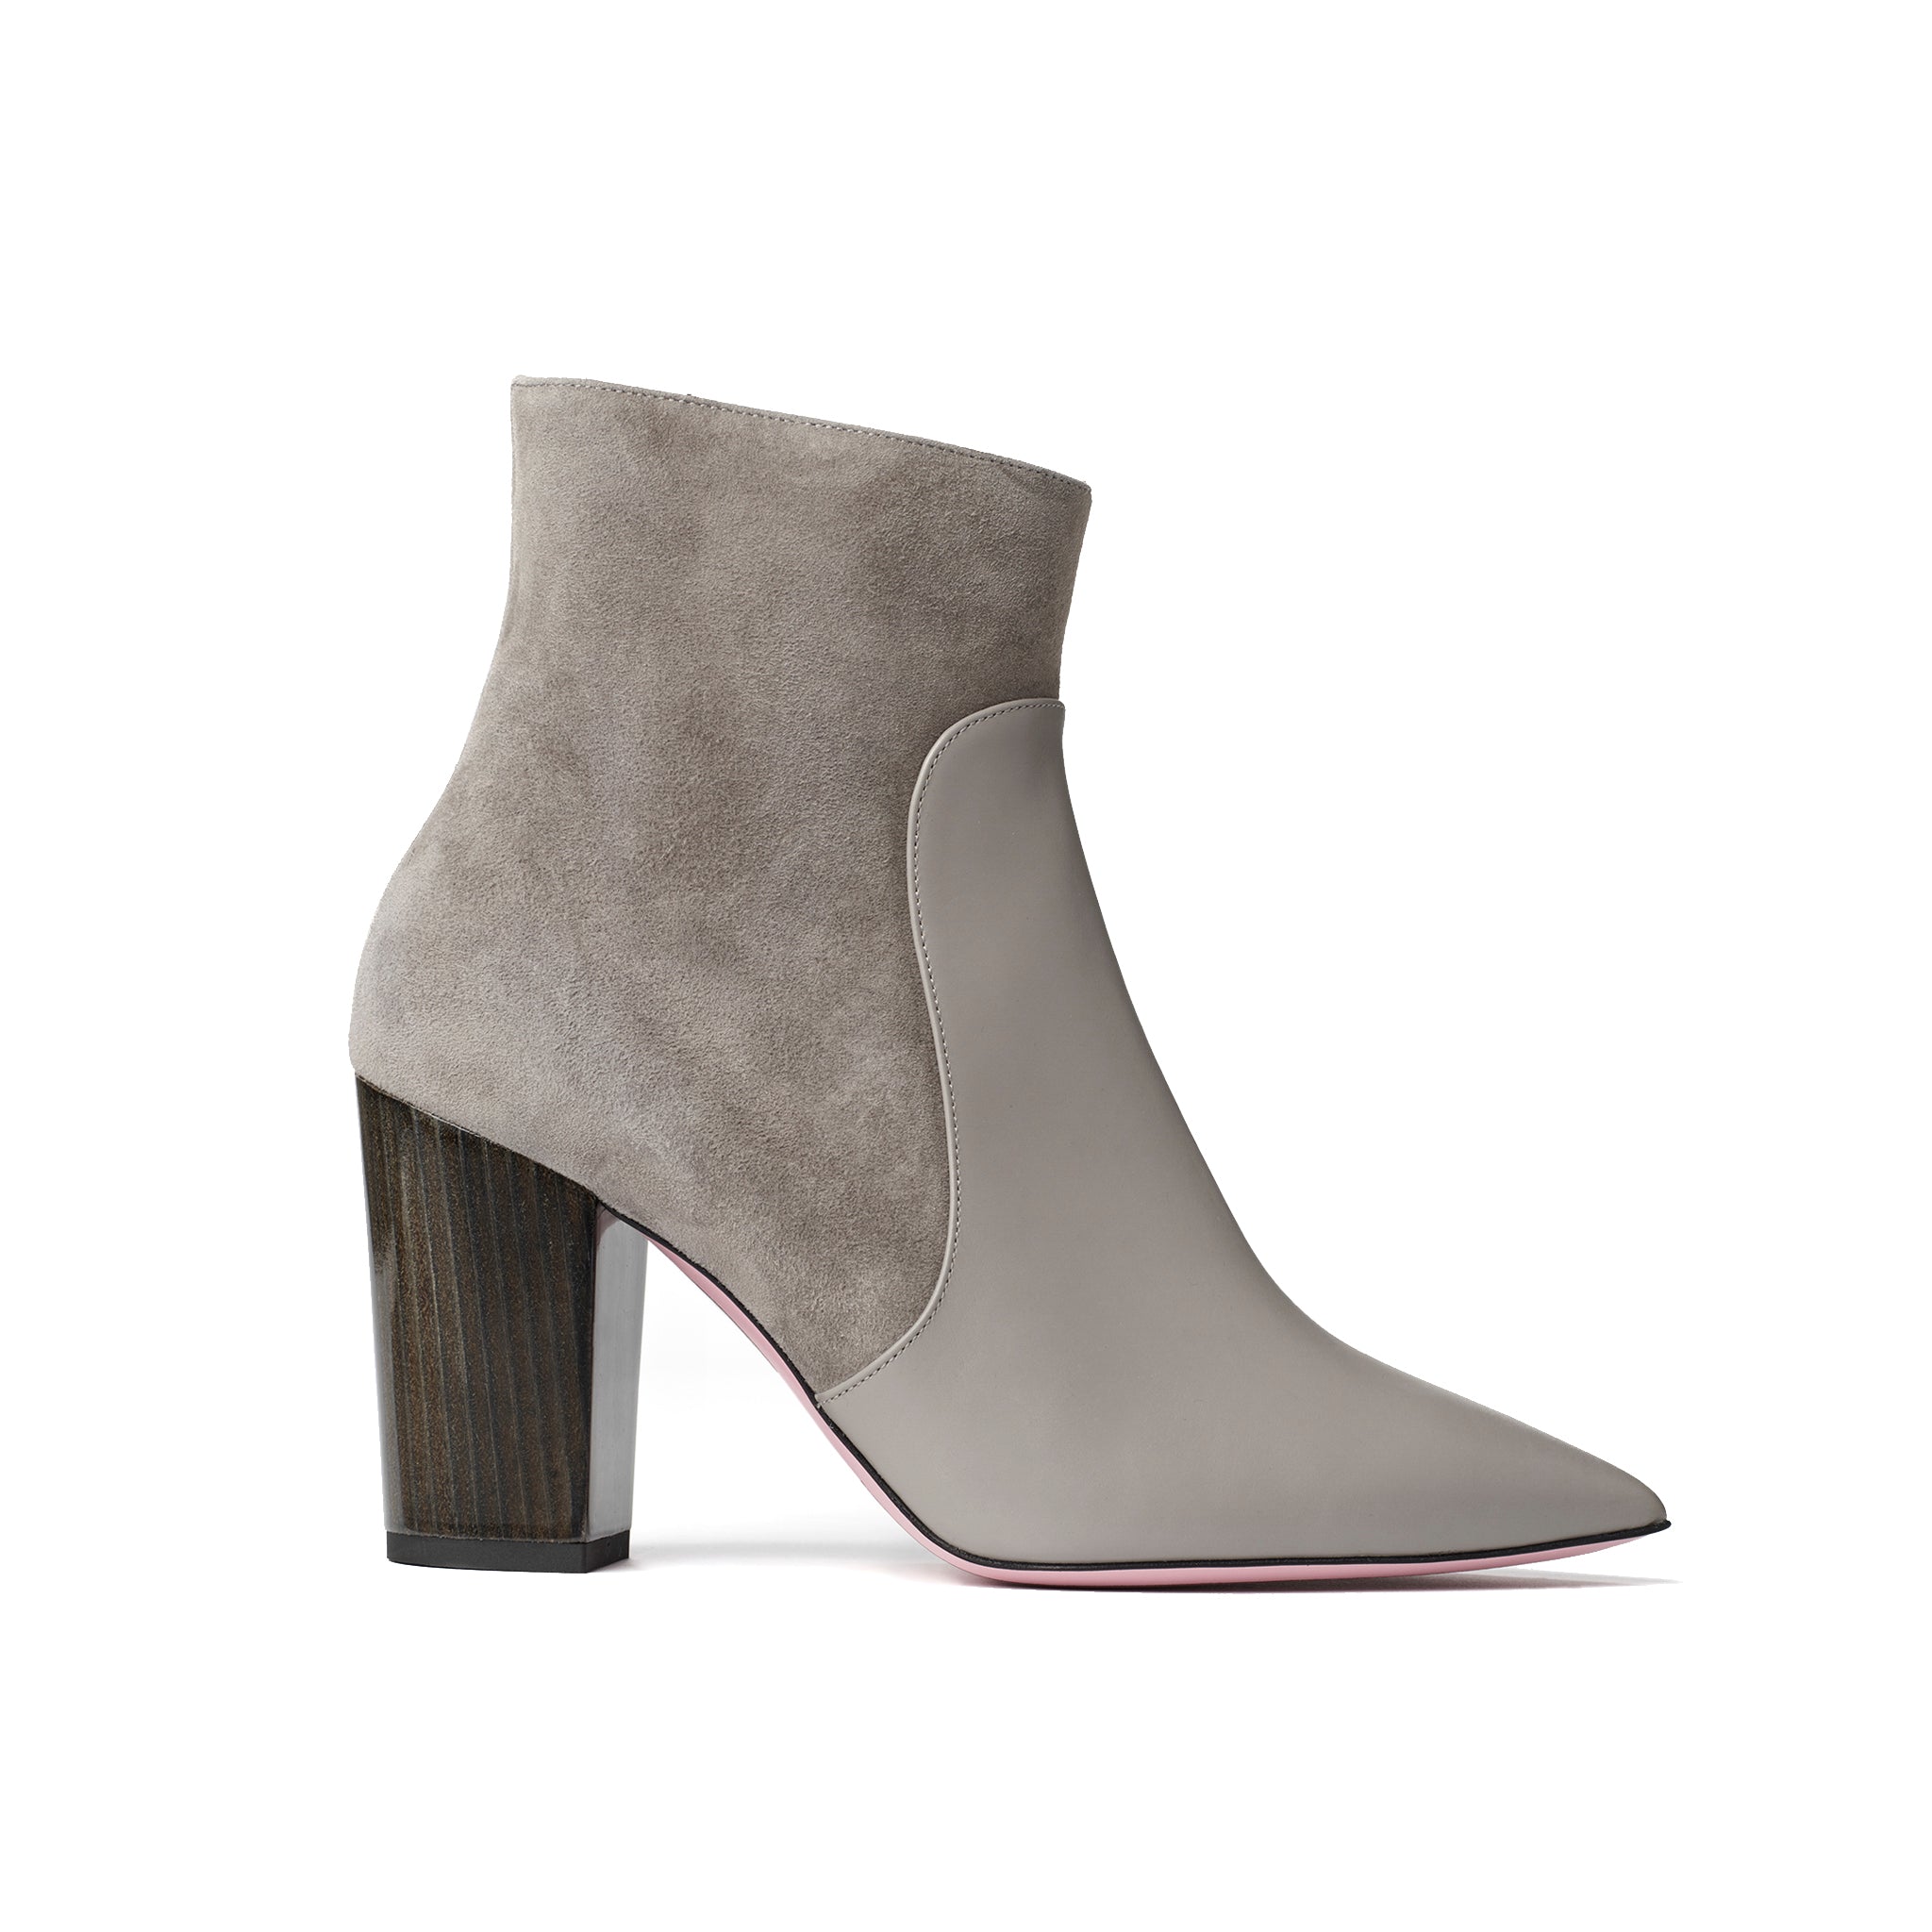 Phare Pointed block heel boot in cemento suede and leather made in Italy